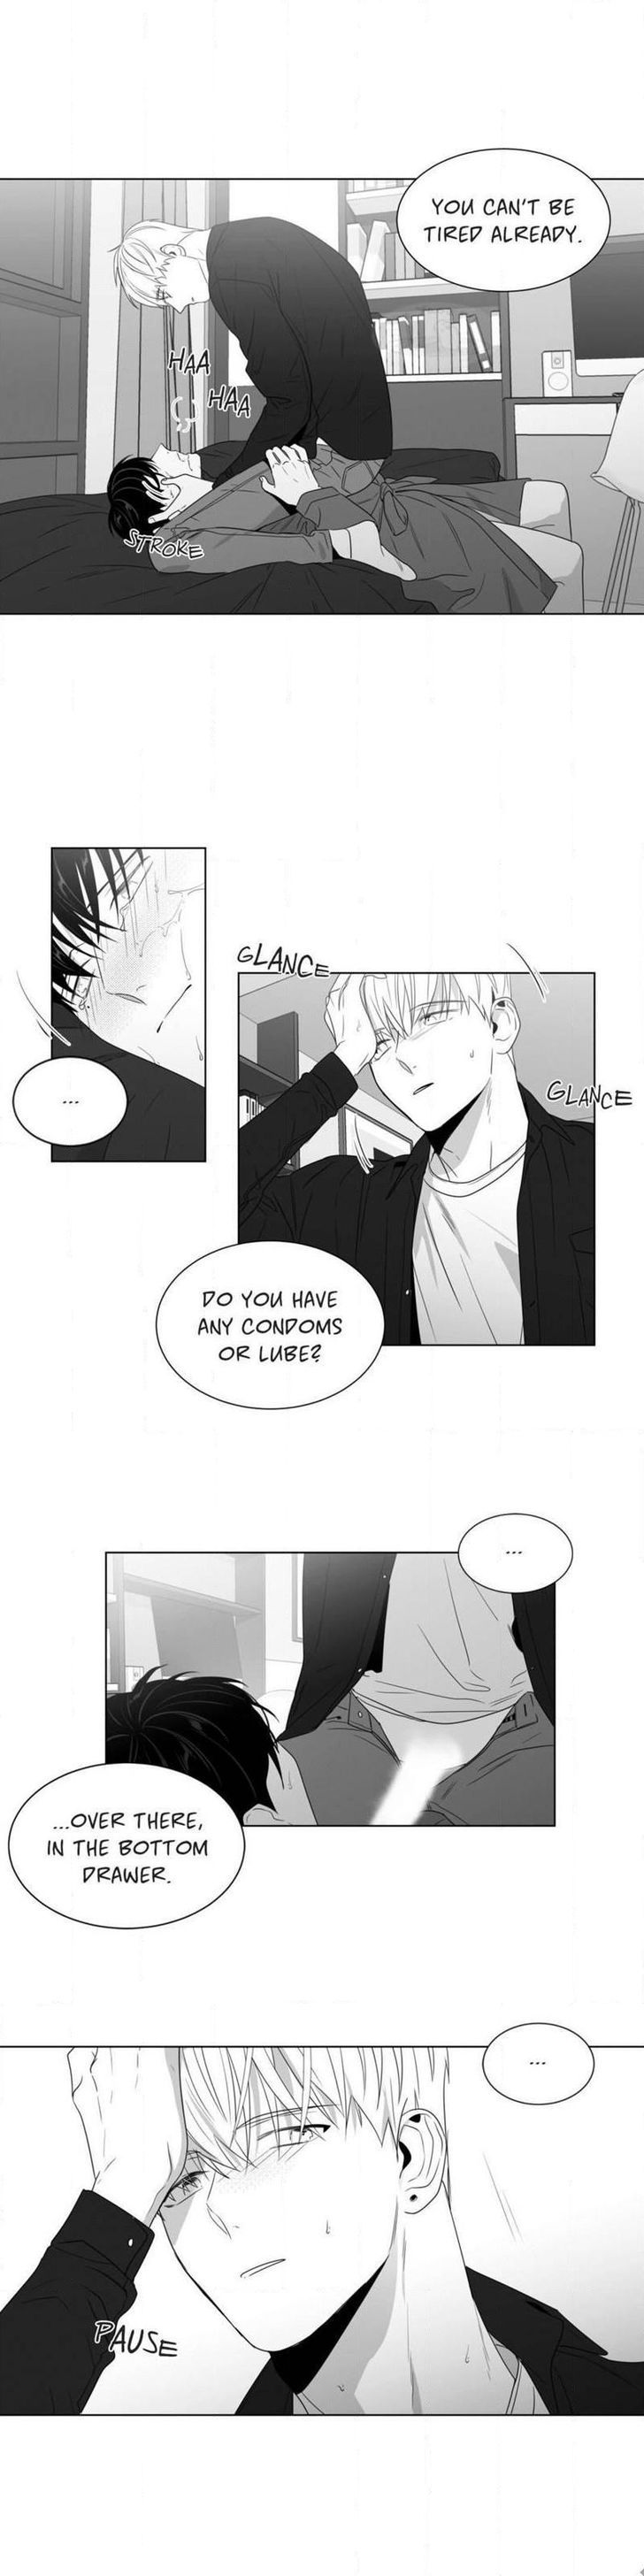 Lover Boy (Lezhin) Chapter 055 page 11